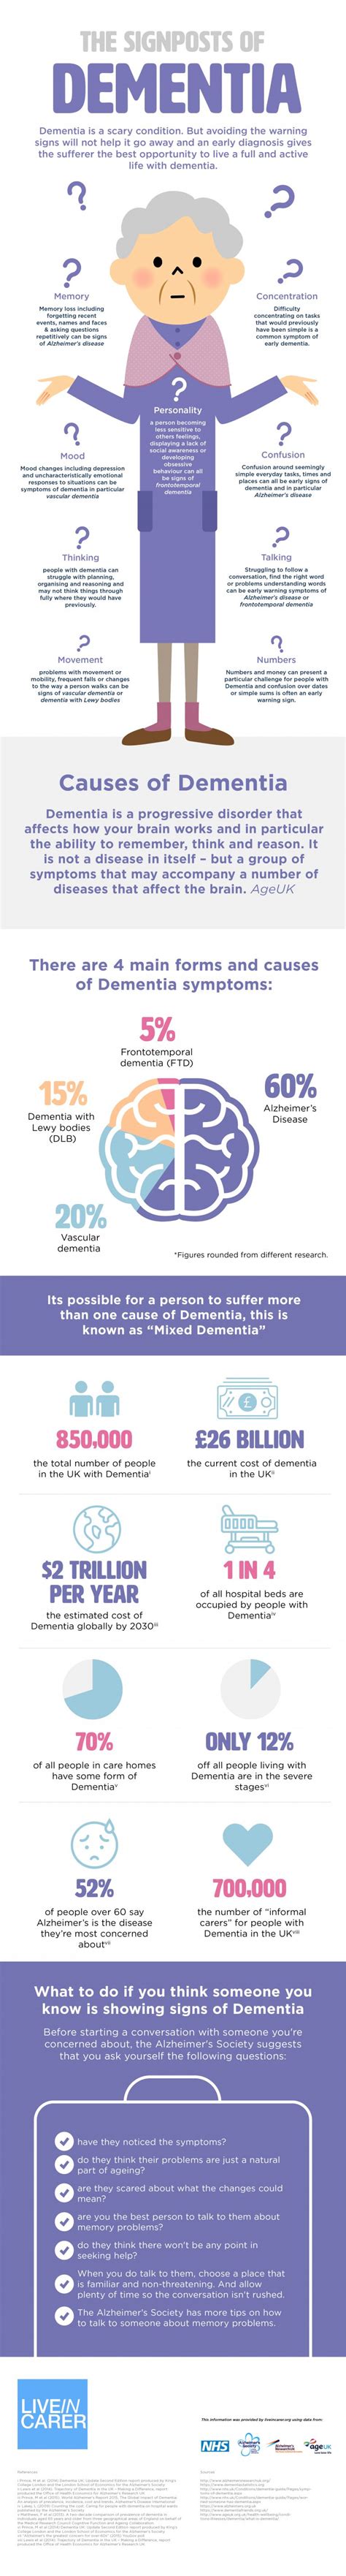 The Signs And Symptoms Of Dementia Infographic Live In Carer